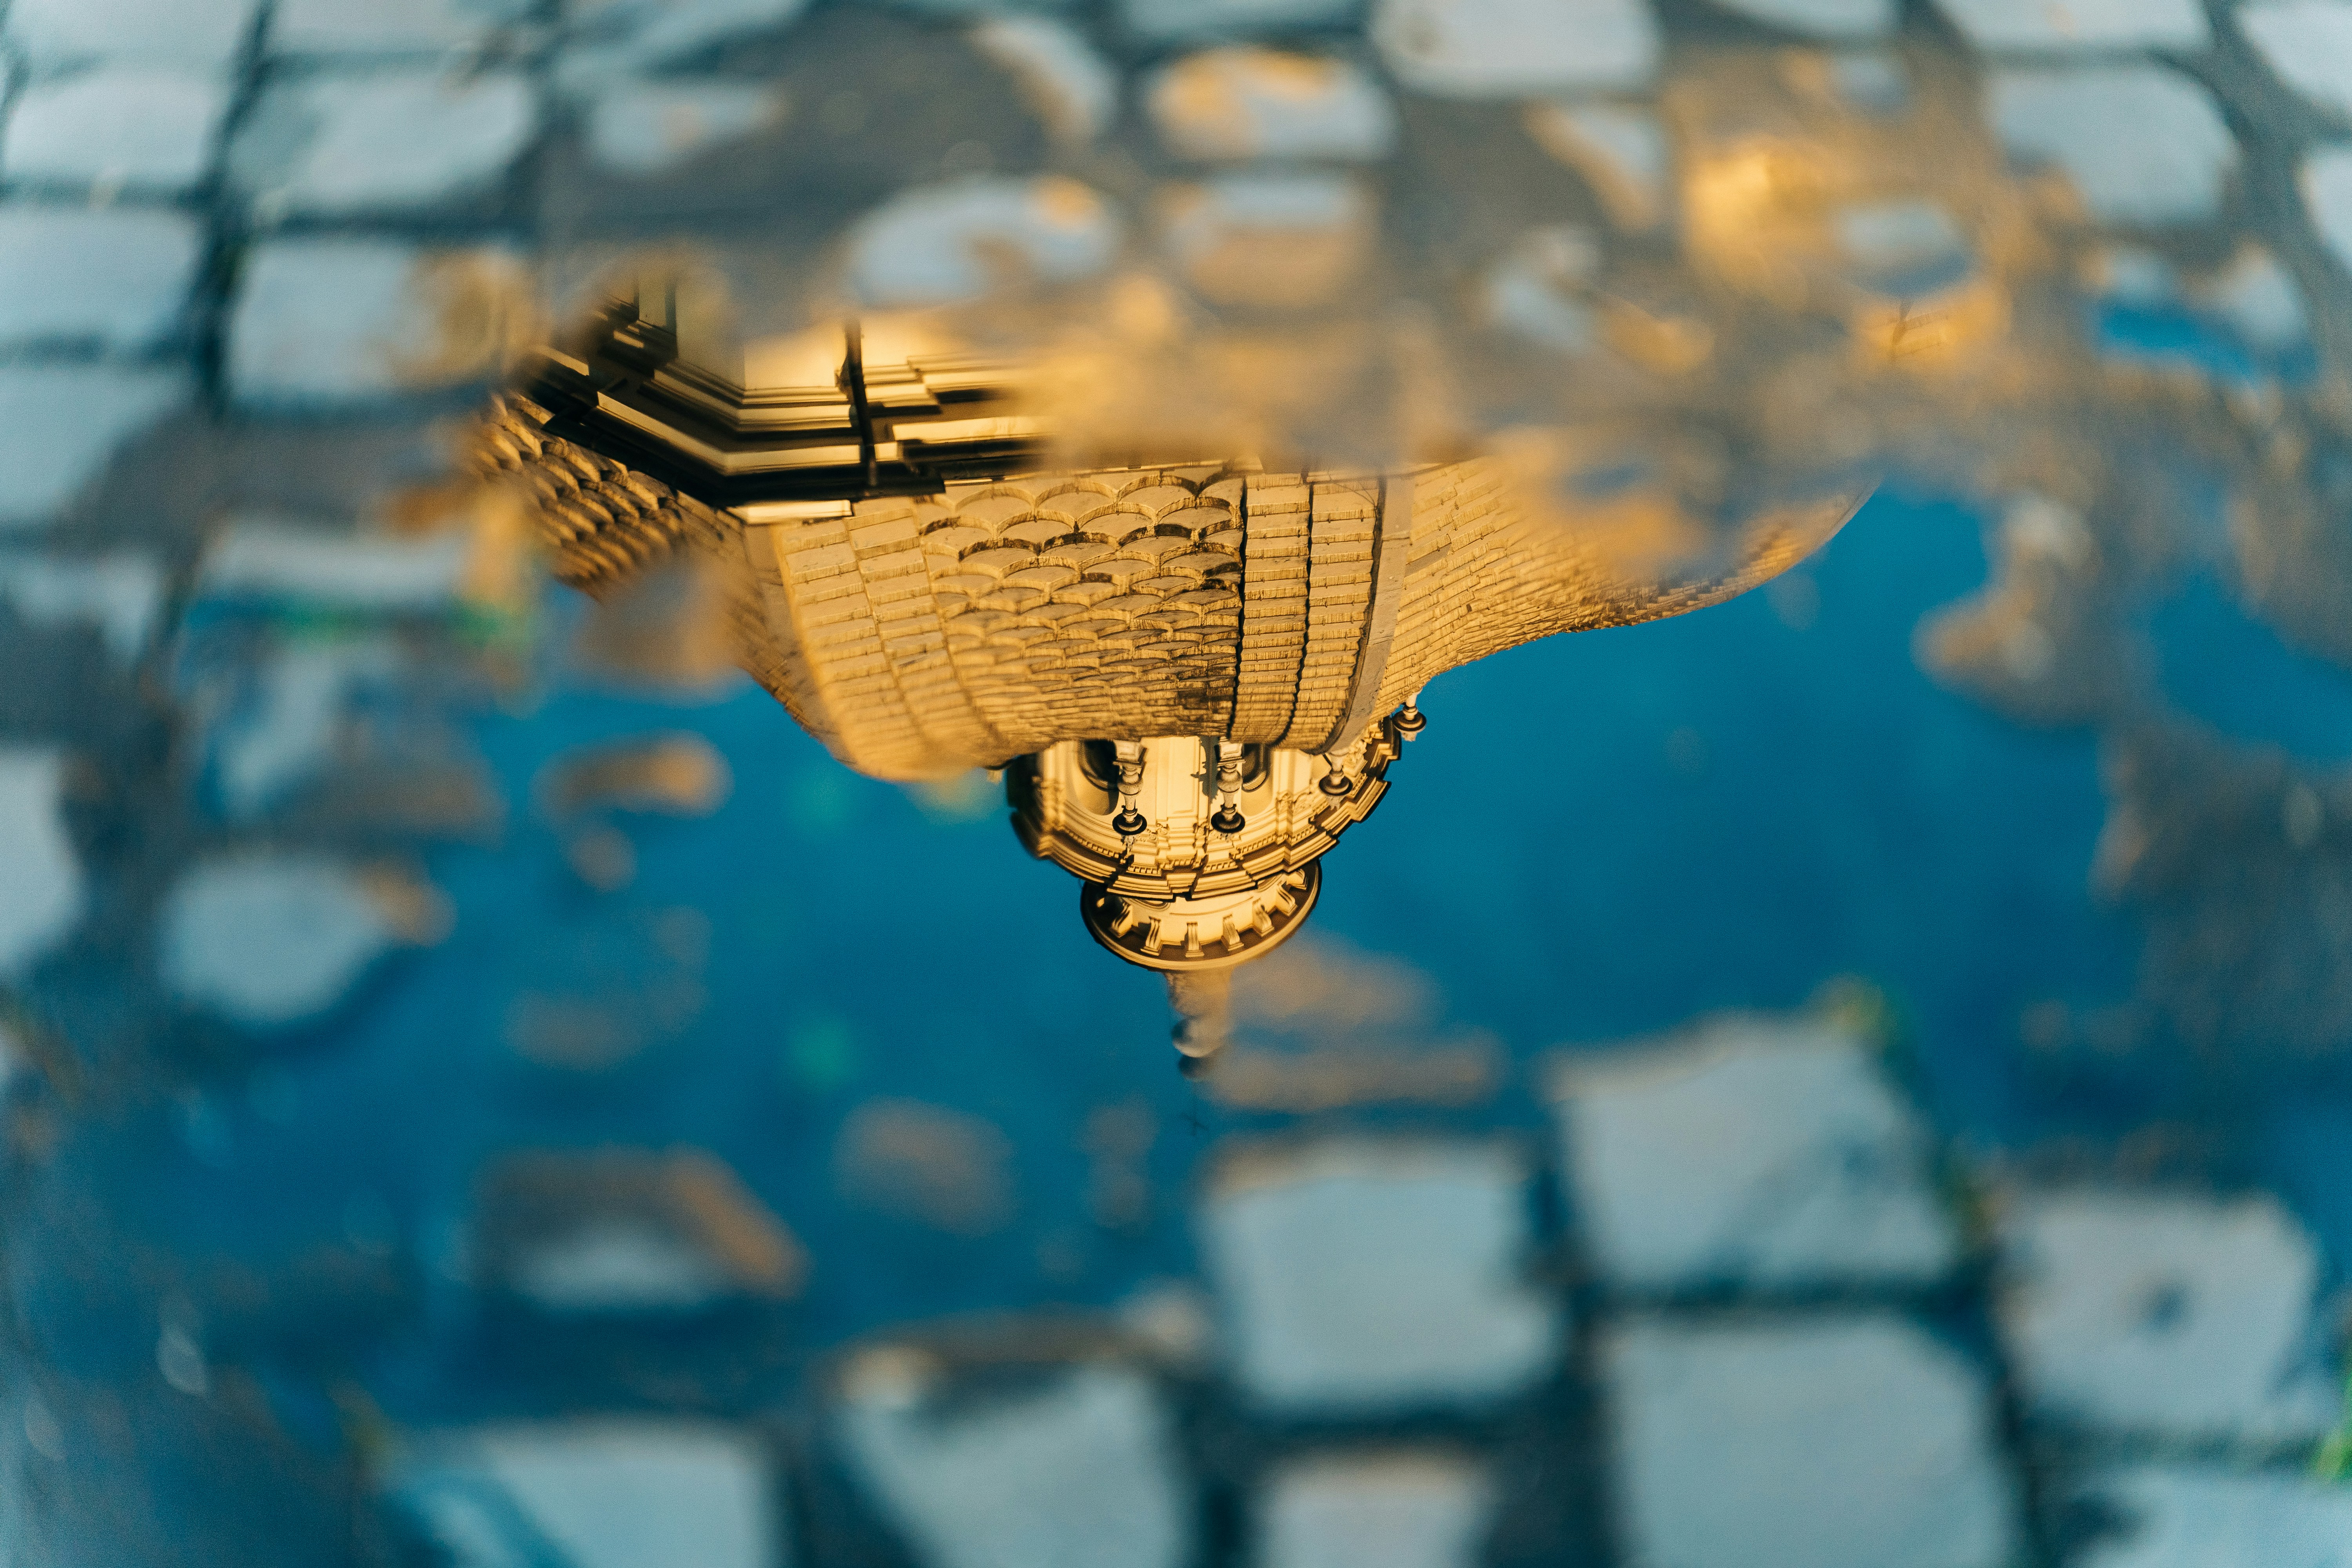 Church dome reflected in a puddle in the cobblestones in Rome, Italy